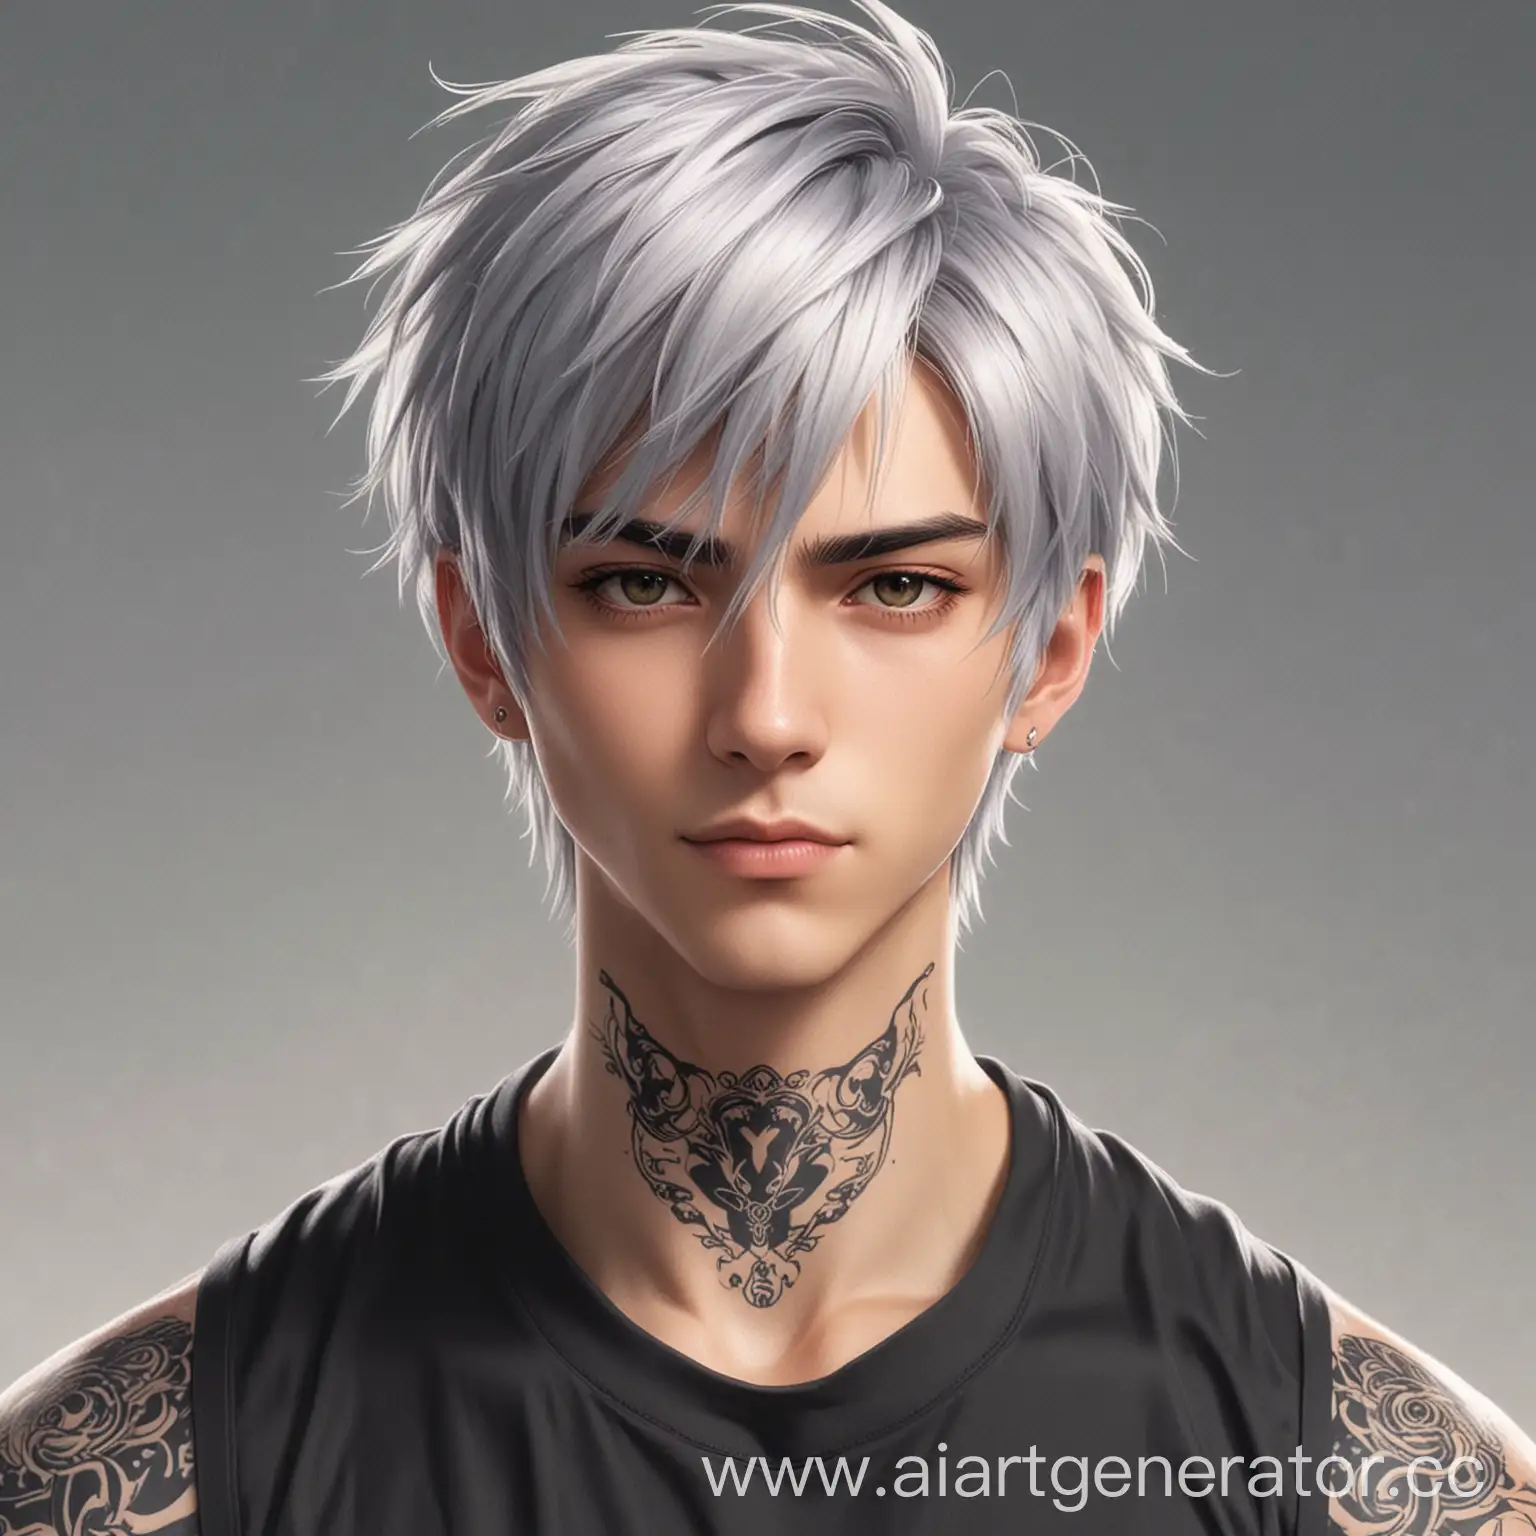 Anime-Style-Portrait-of-a-Tattooed-SilveryHaired-Young-Man